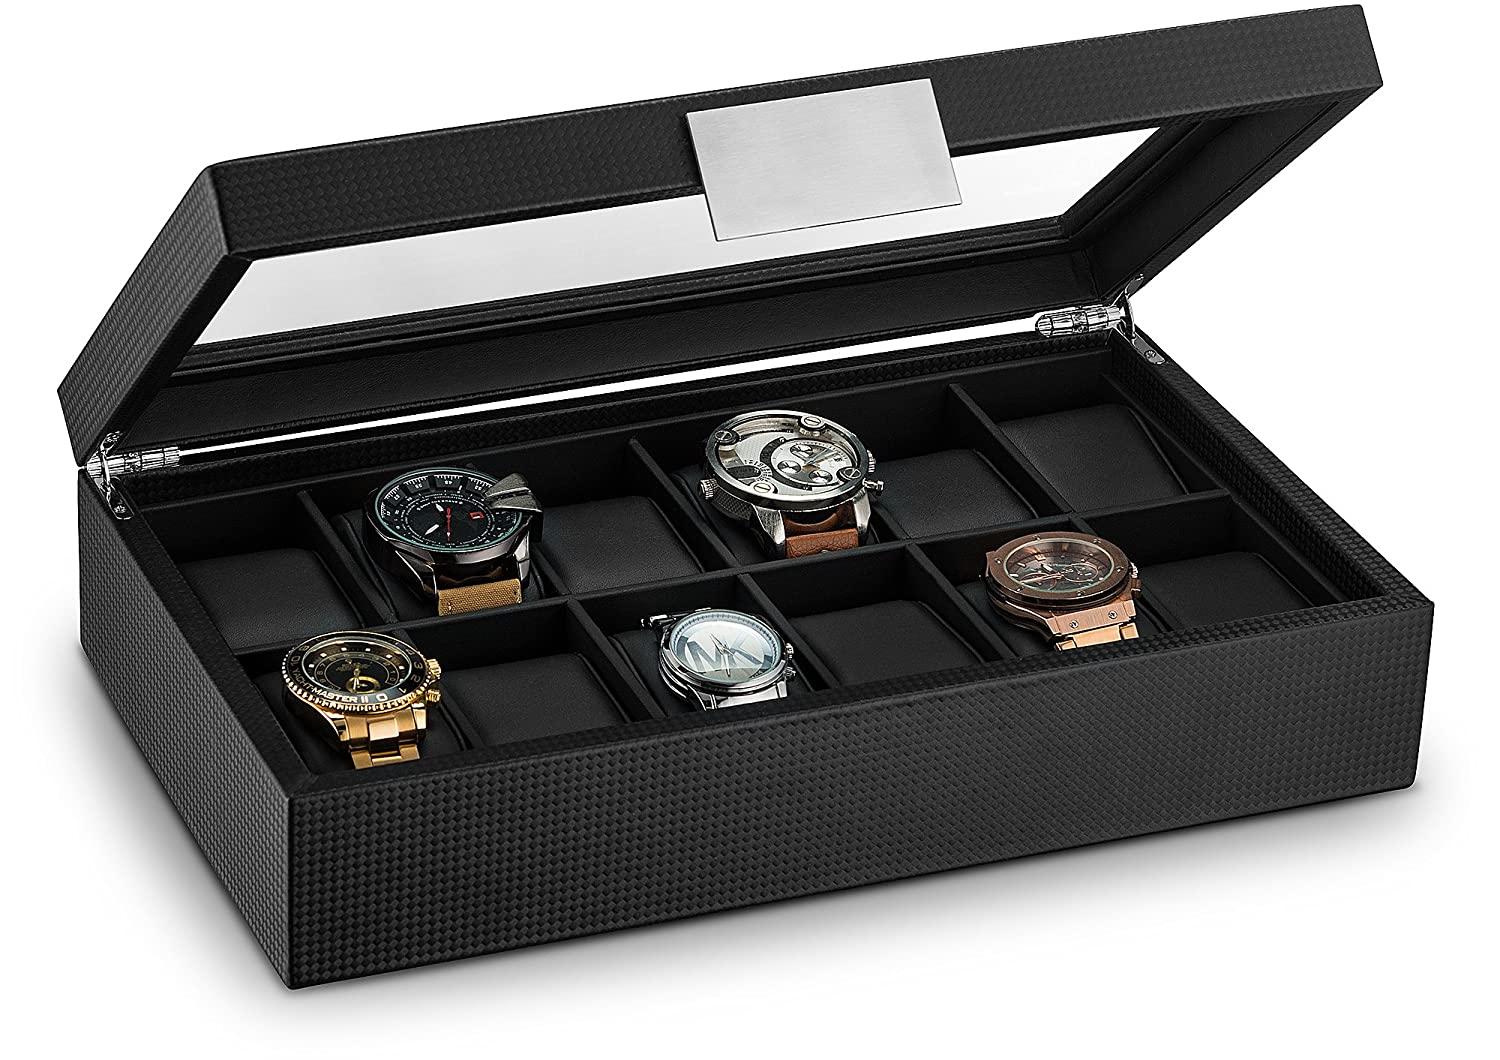 Why should I try Watchbox for your next luxury watch